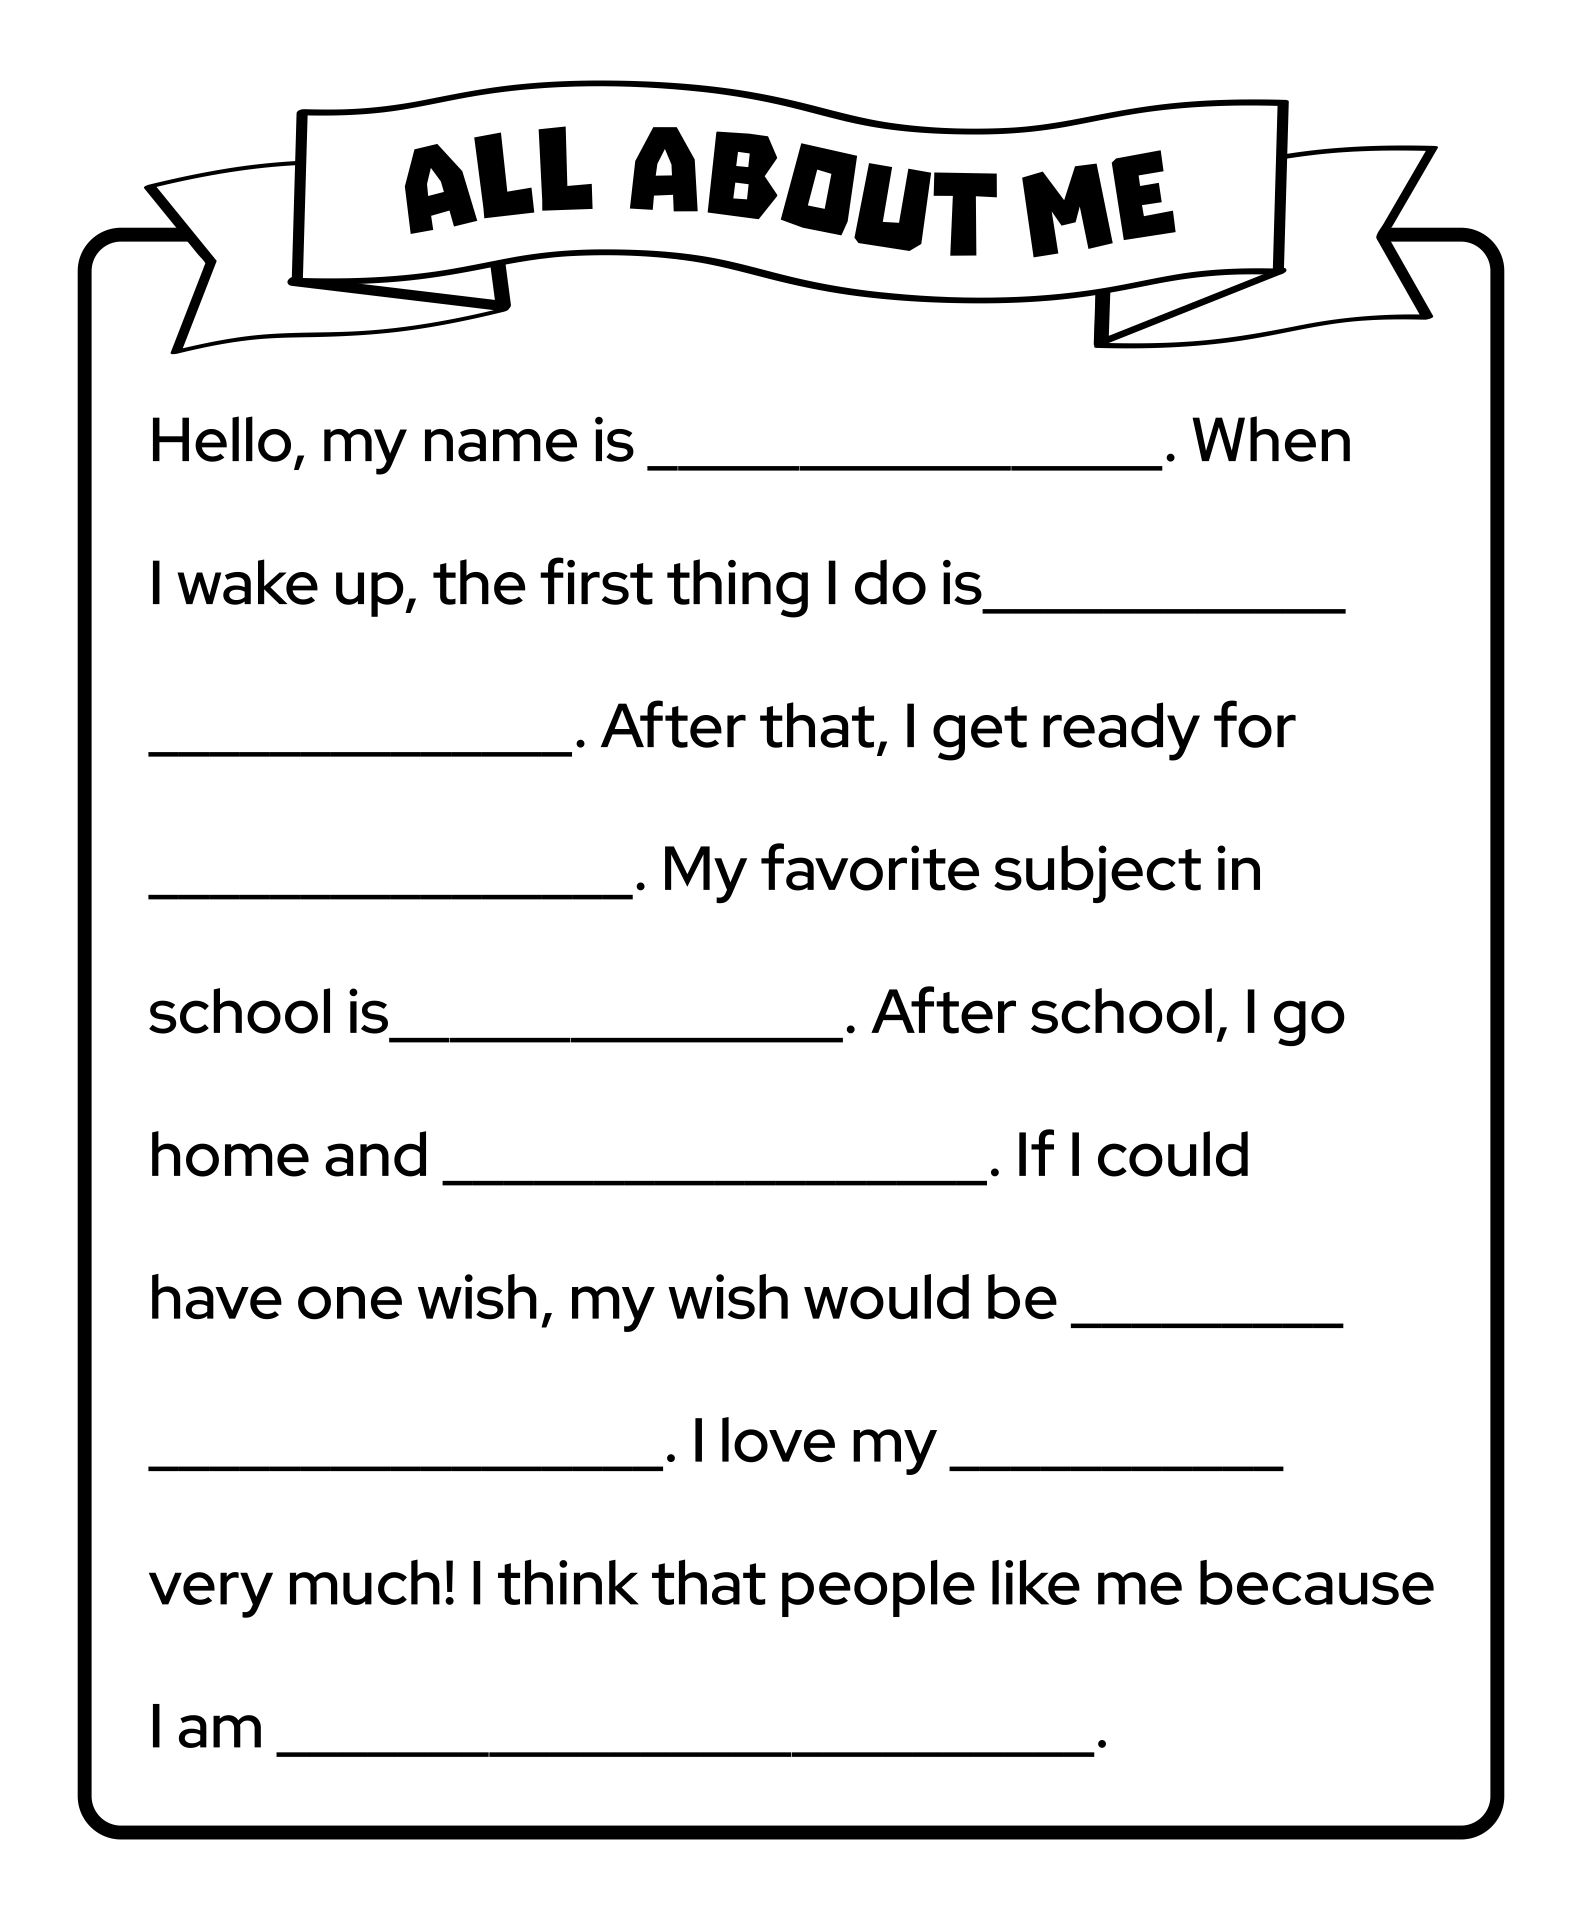 all-about-me-worksheet